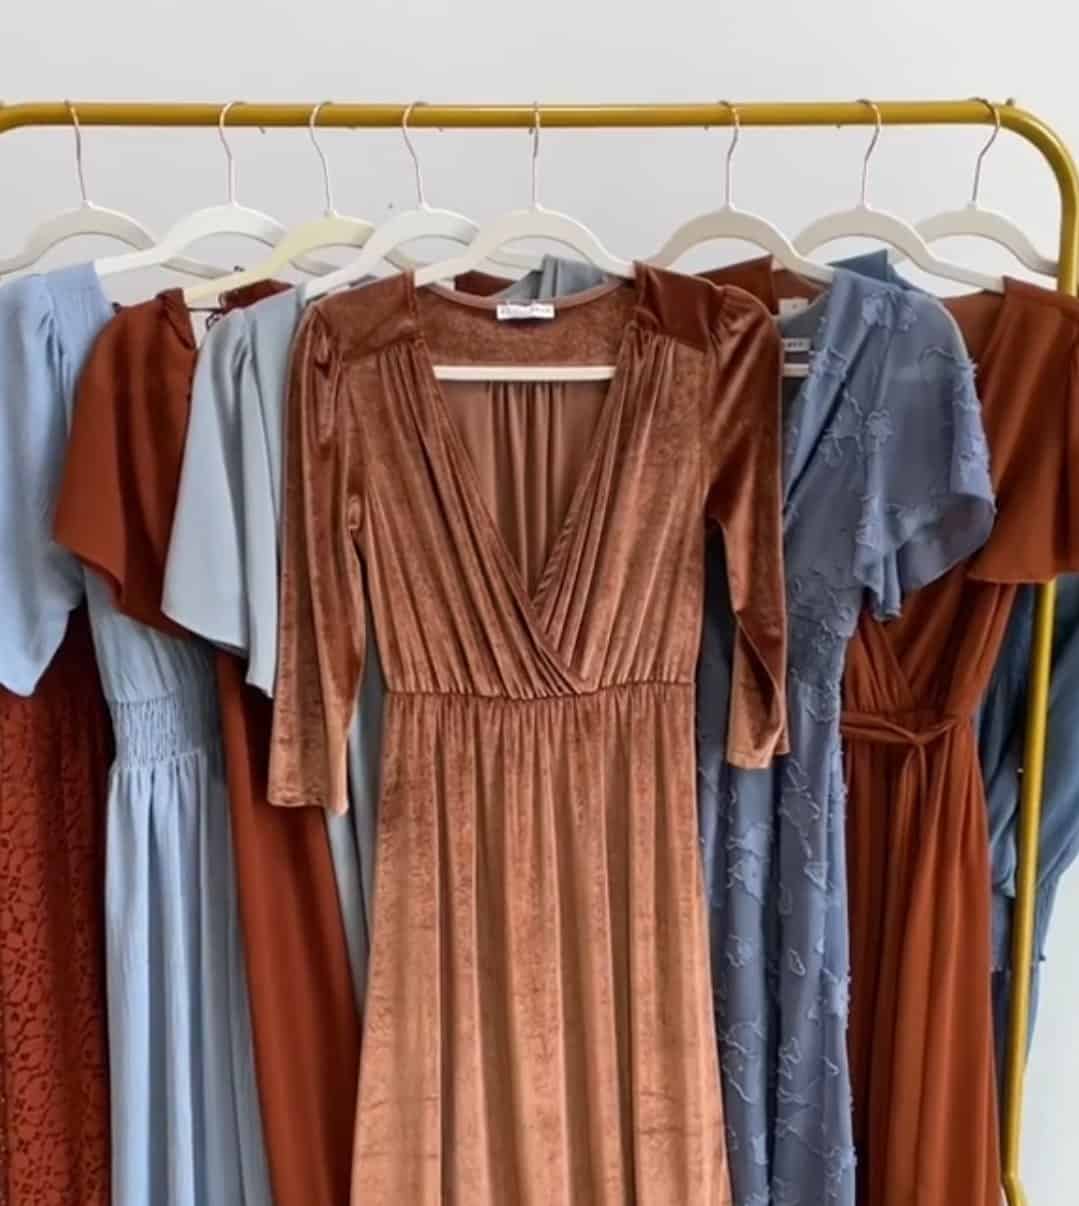 copper and dusty blue bridesmaid dresses hung together